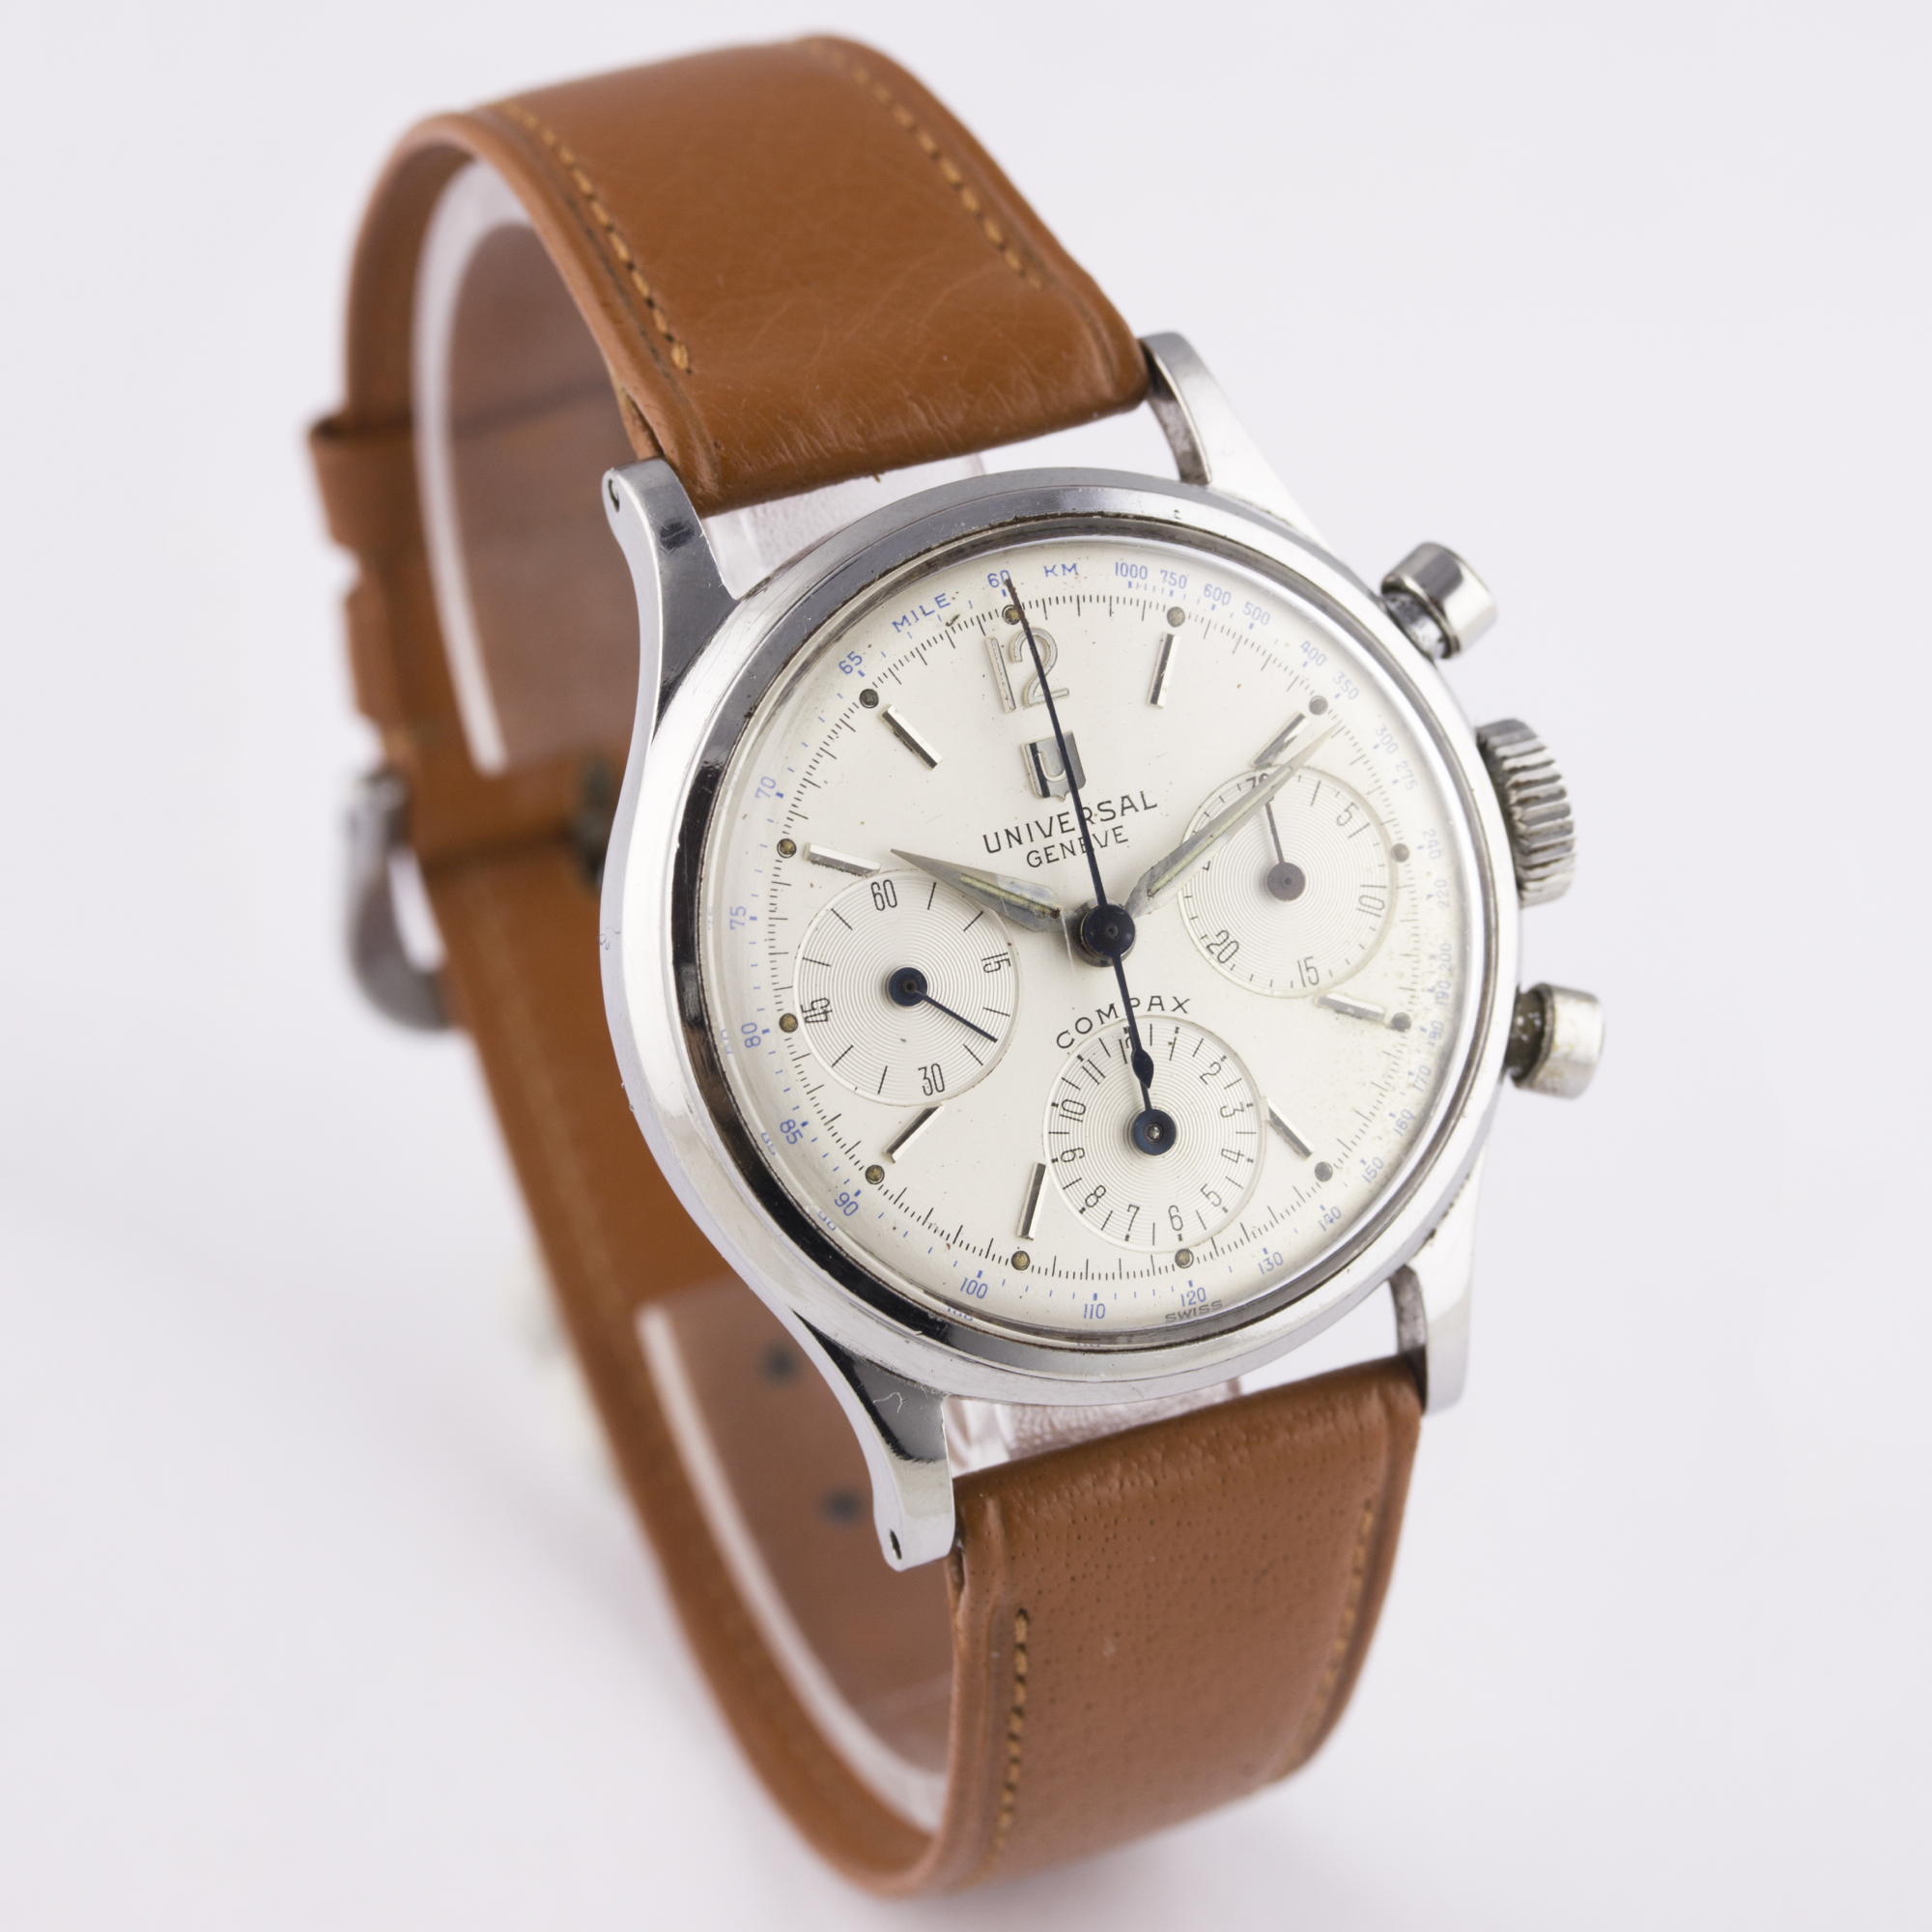 A RARE GENTLEMAN'S STAINLESS STEEL UNIVERSAL GENEVE COMPAX CHRONOGRAPH WRIST WATCH CIRCA 1950s, REF. - Image 5 of 8